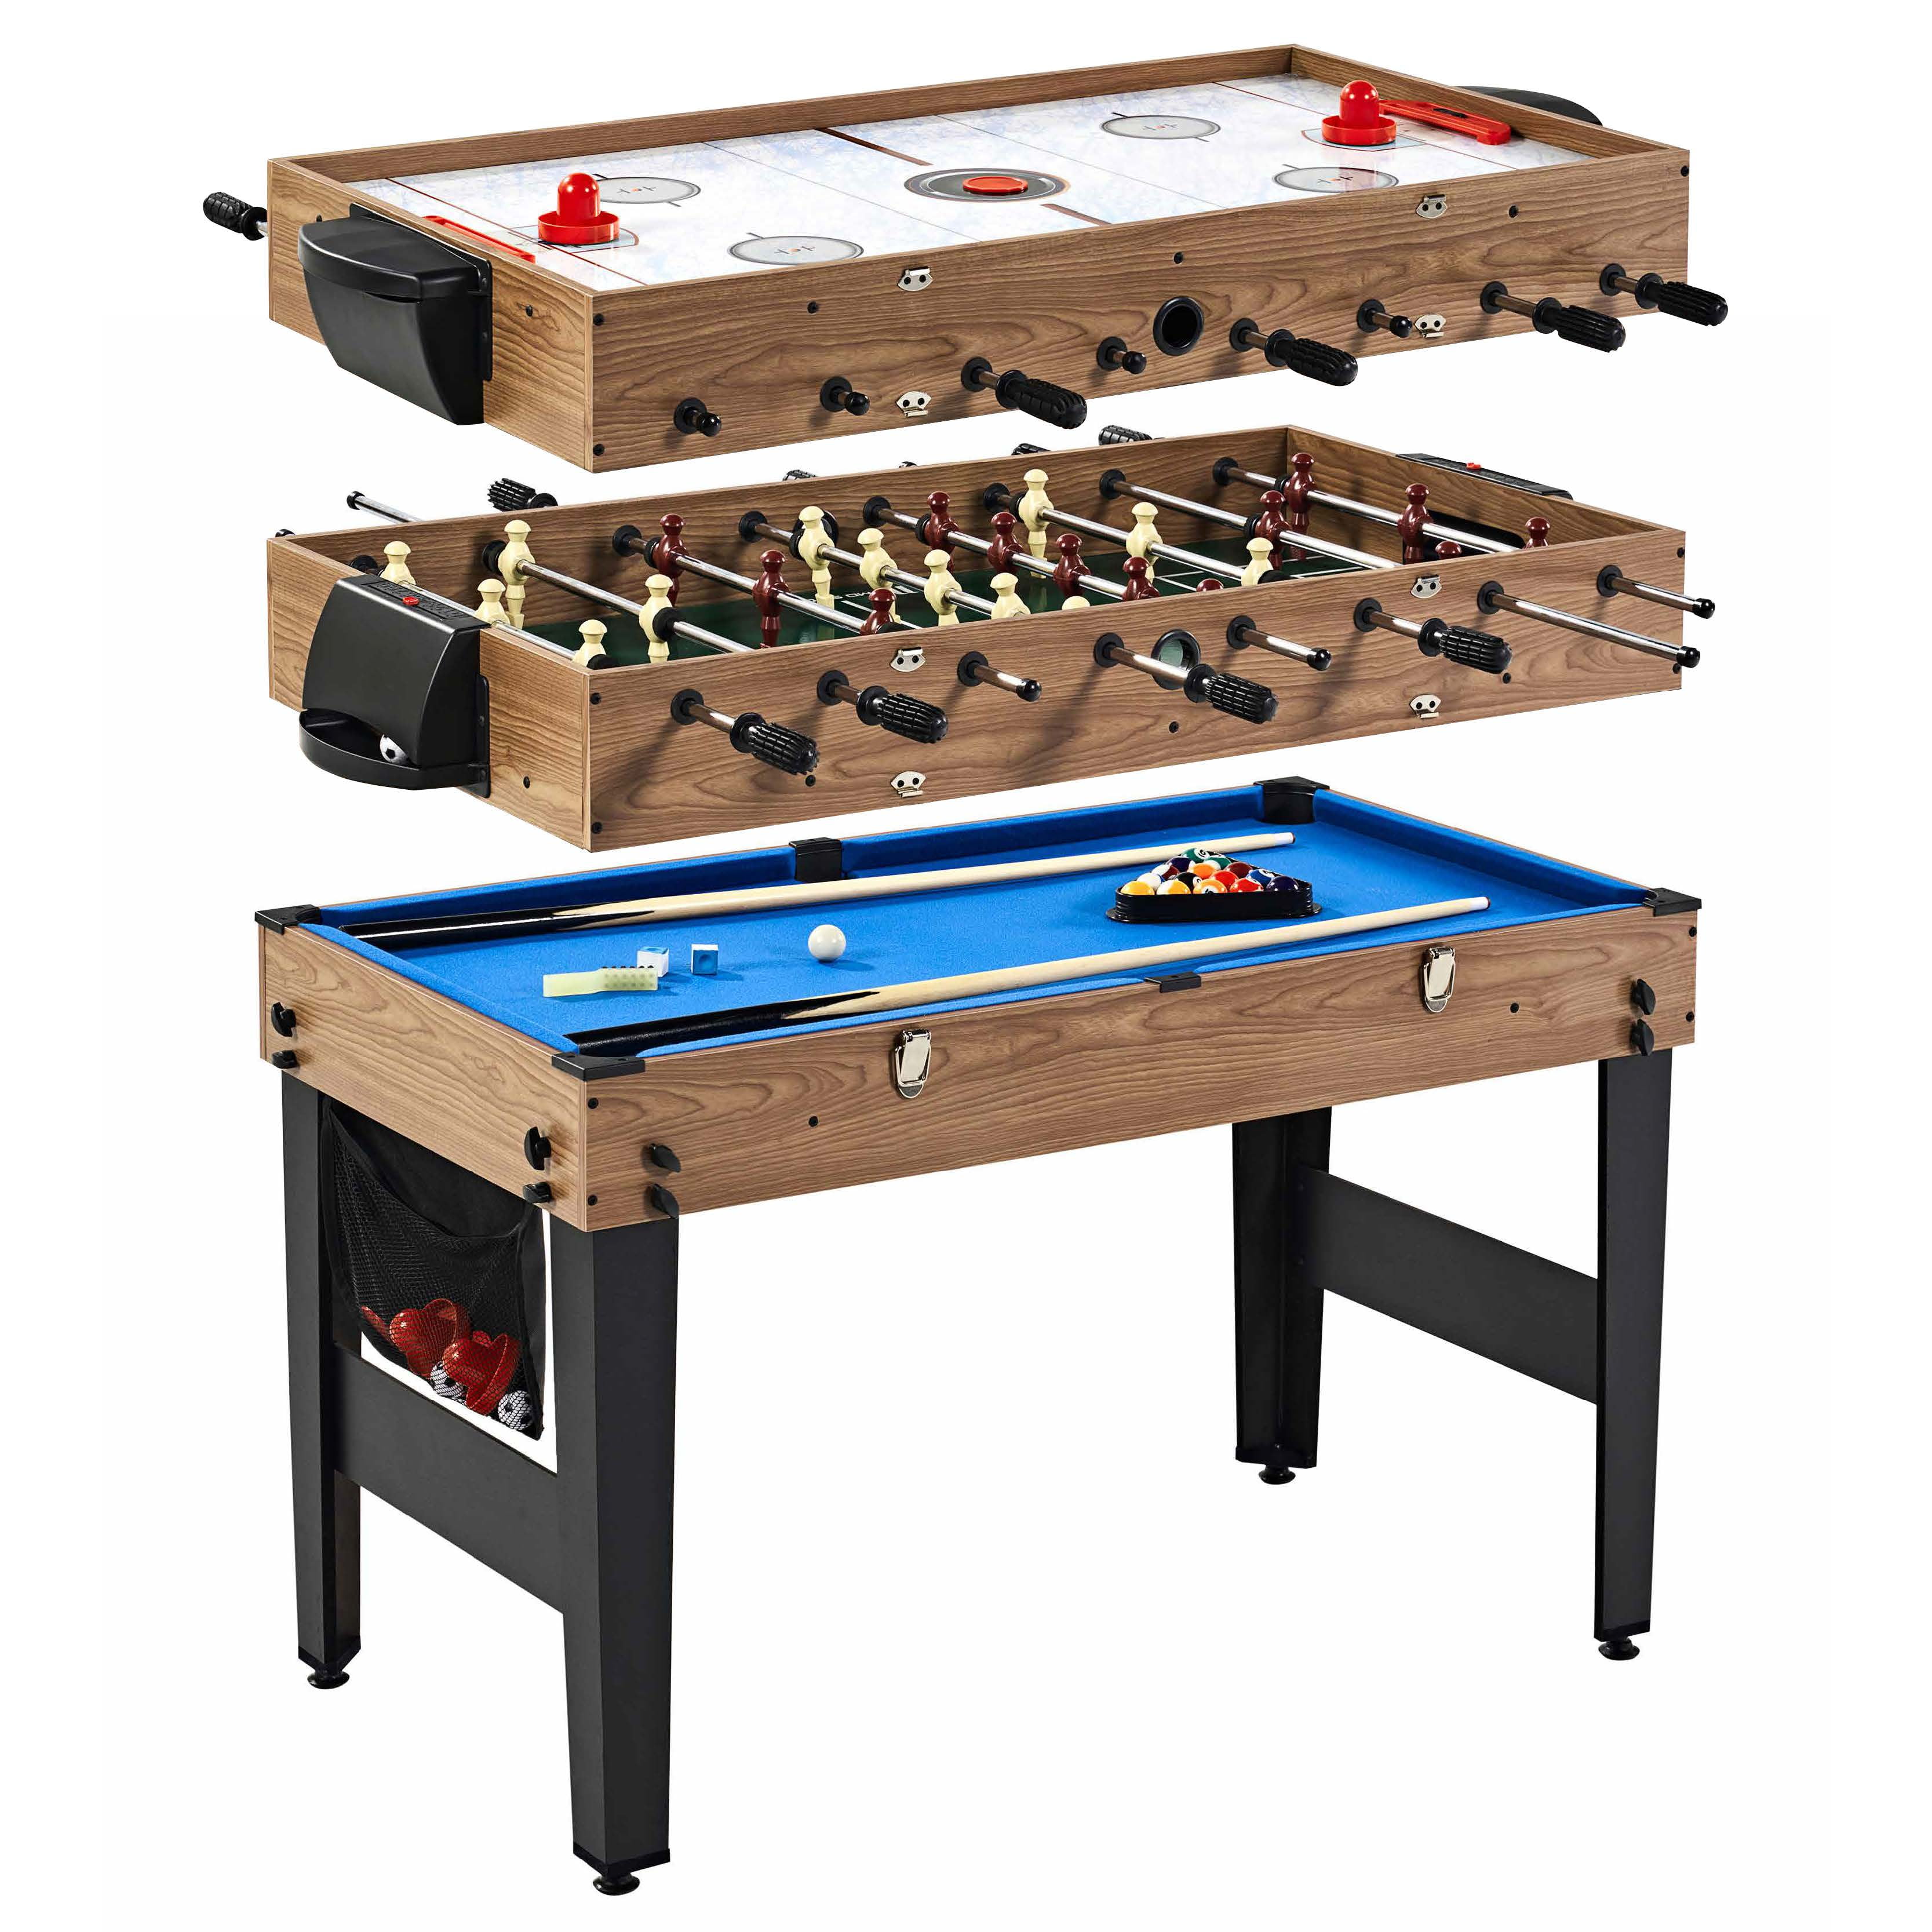 Swivel Combo Game Table 4 Games Hockey Billiards Table Tennis Basketball 72 Inch 